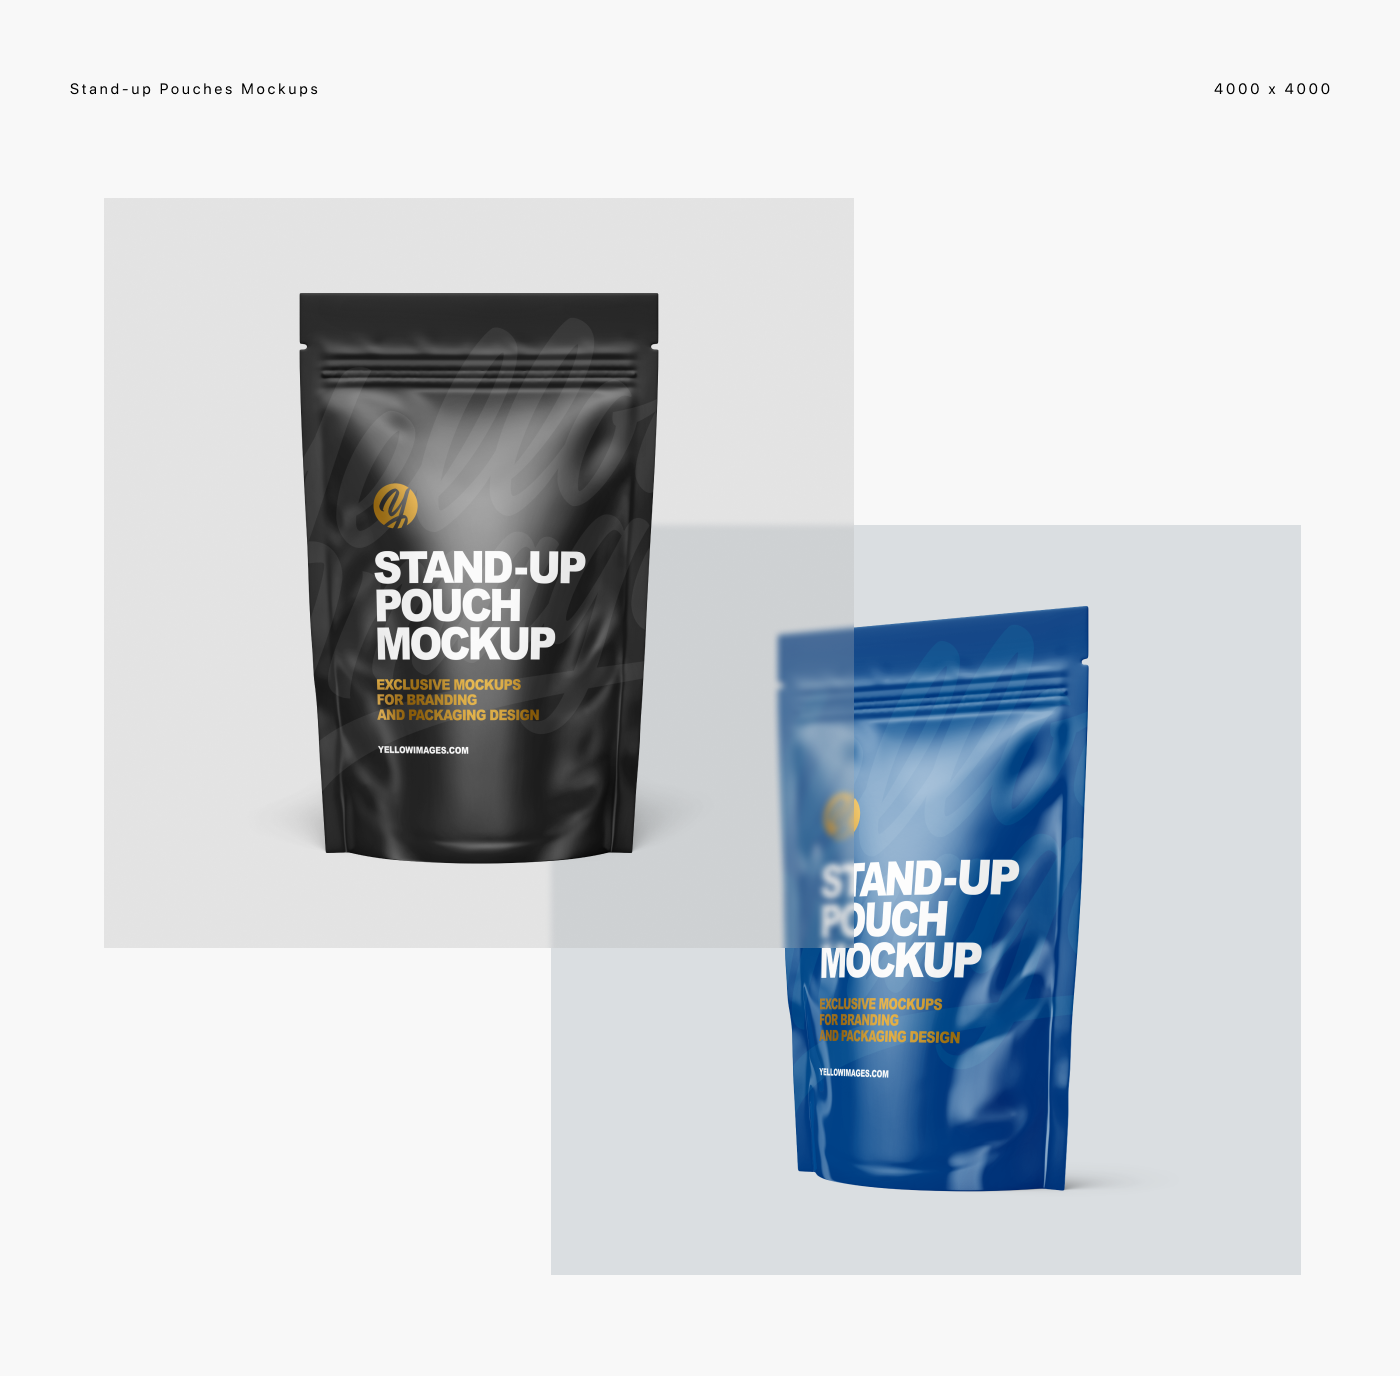 Download Stand-up Pouch Mockups PSD on Behance